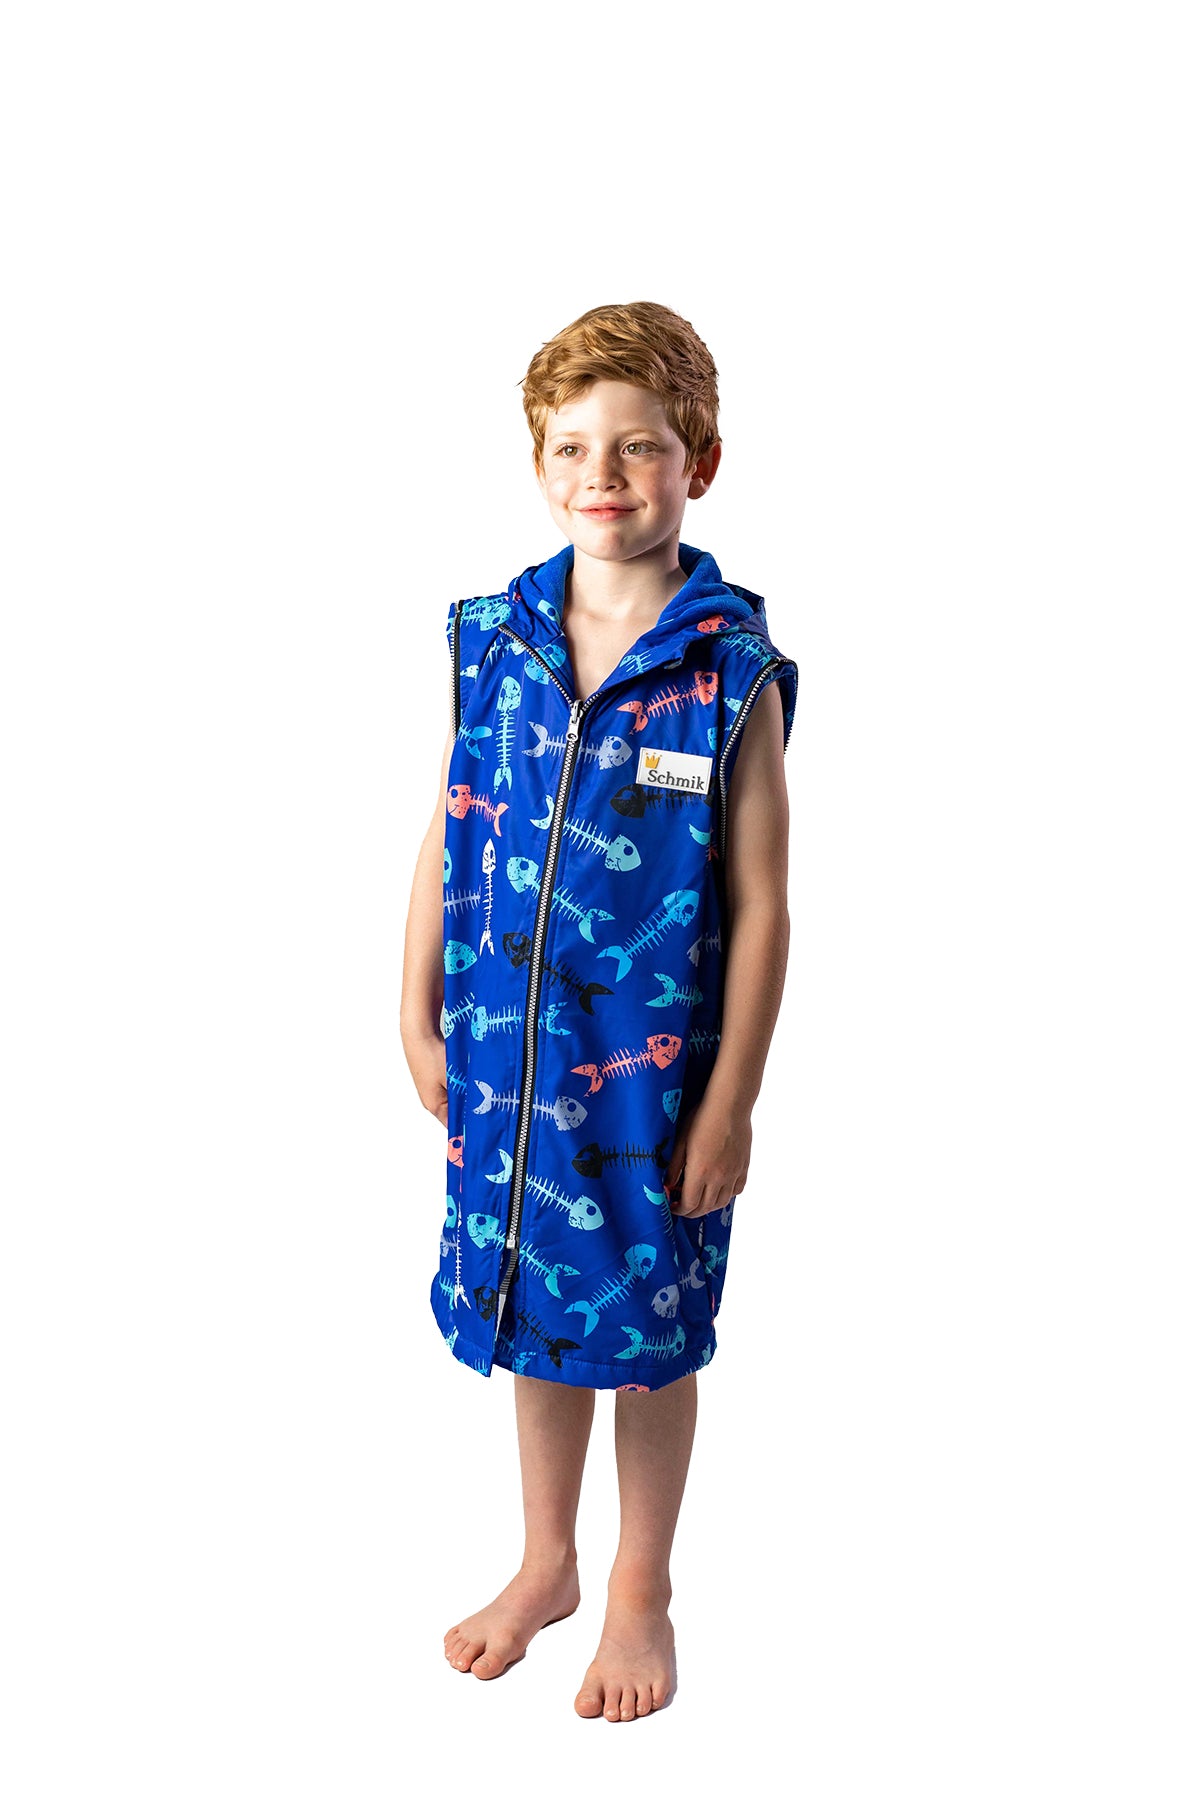 7 year old boy wearing a size 10 fishbone print swim parka. Swim parka has its arms removed.